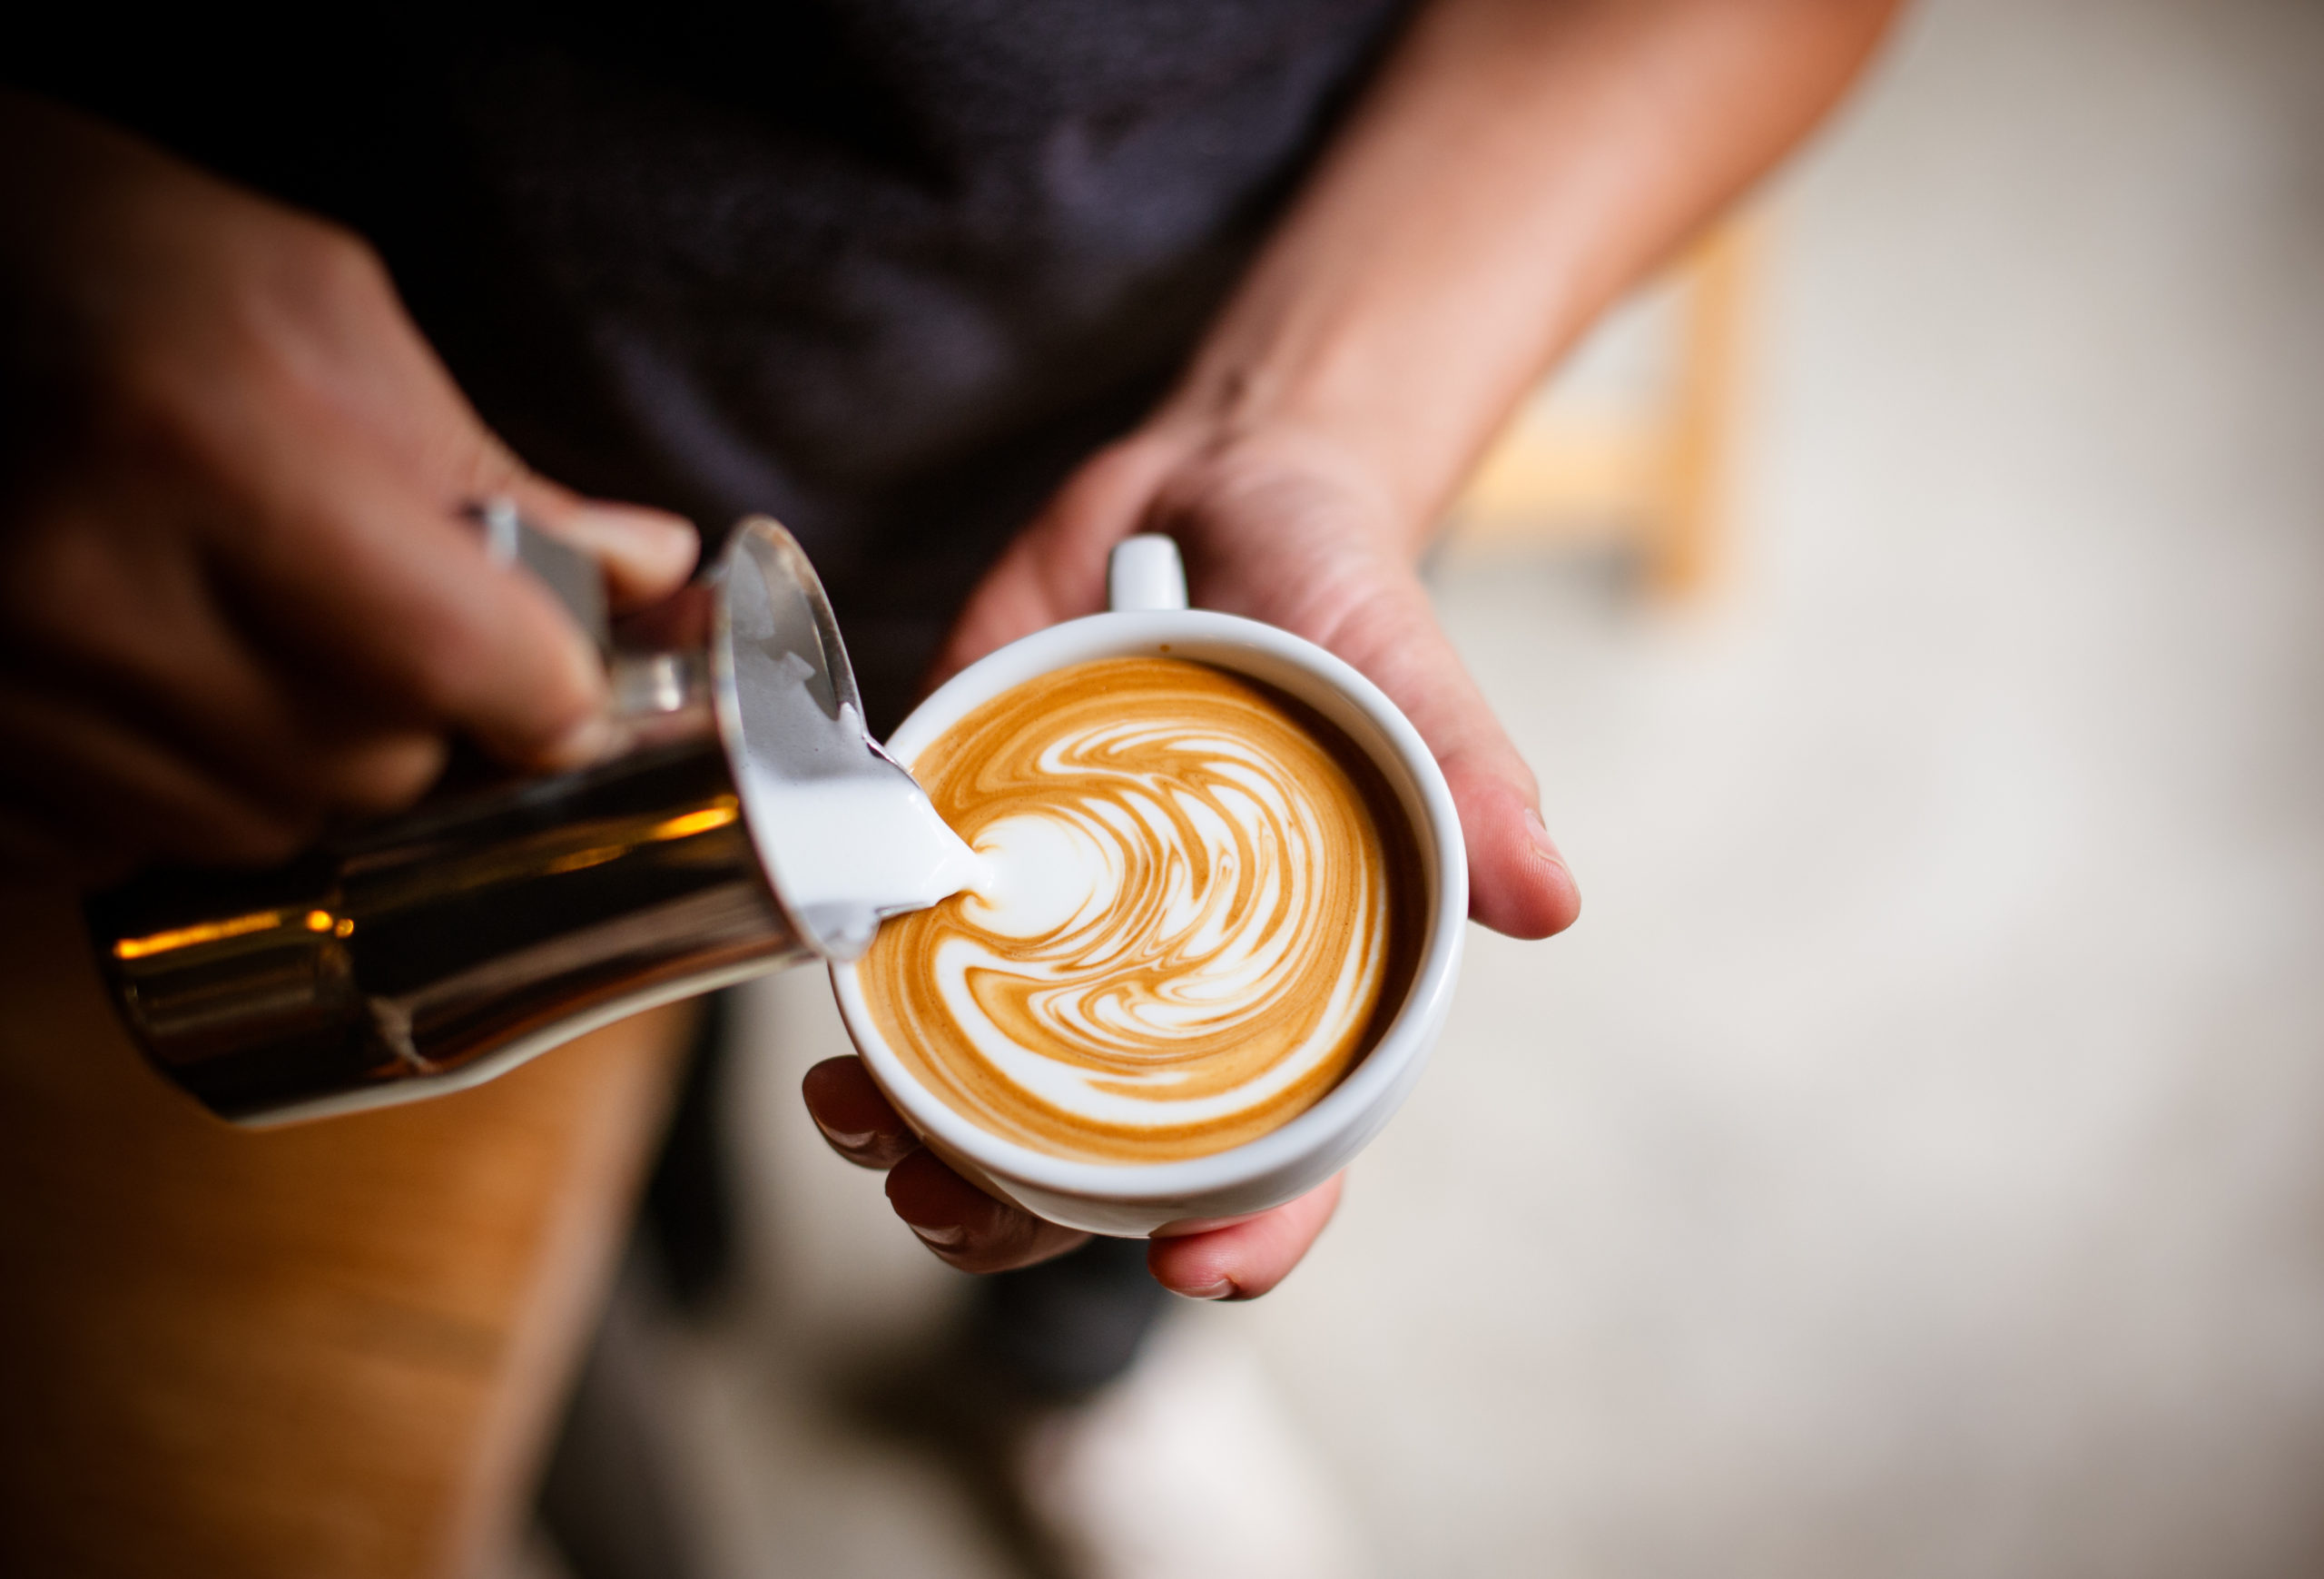 From 15th Century monks to modern capitalism and latte art